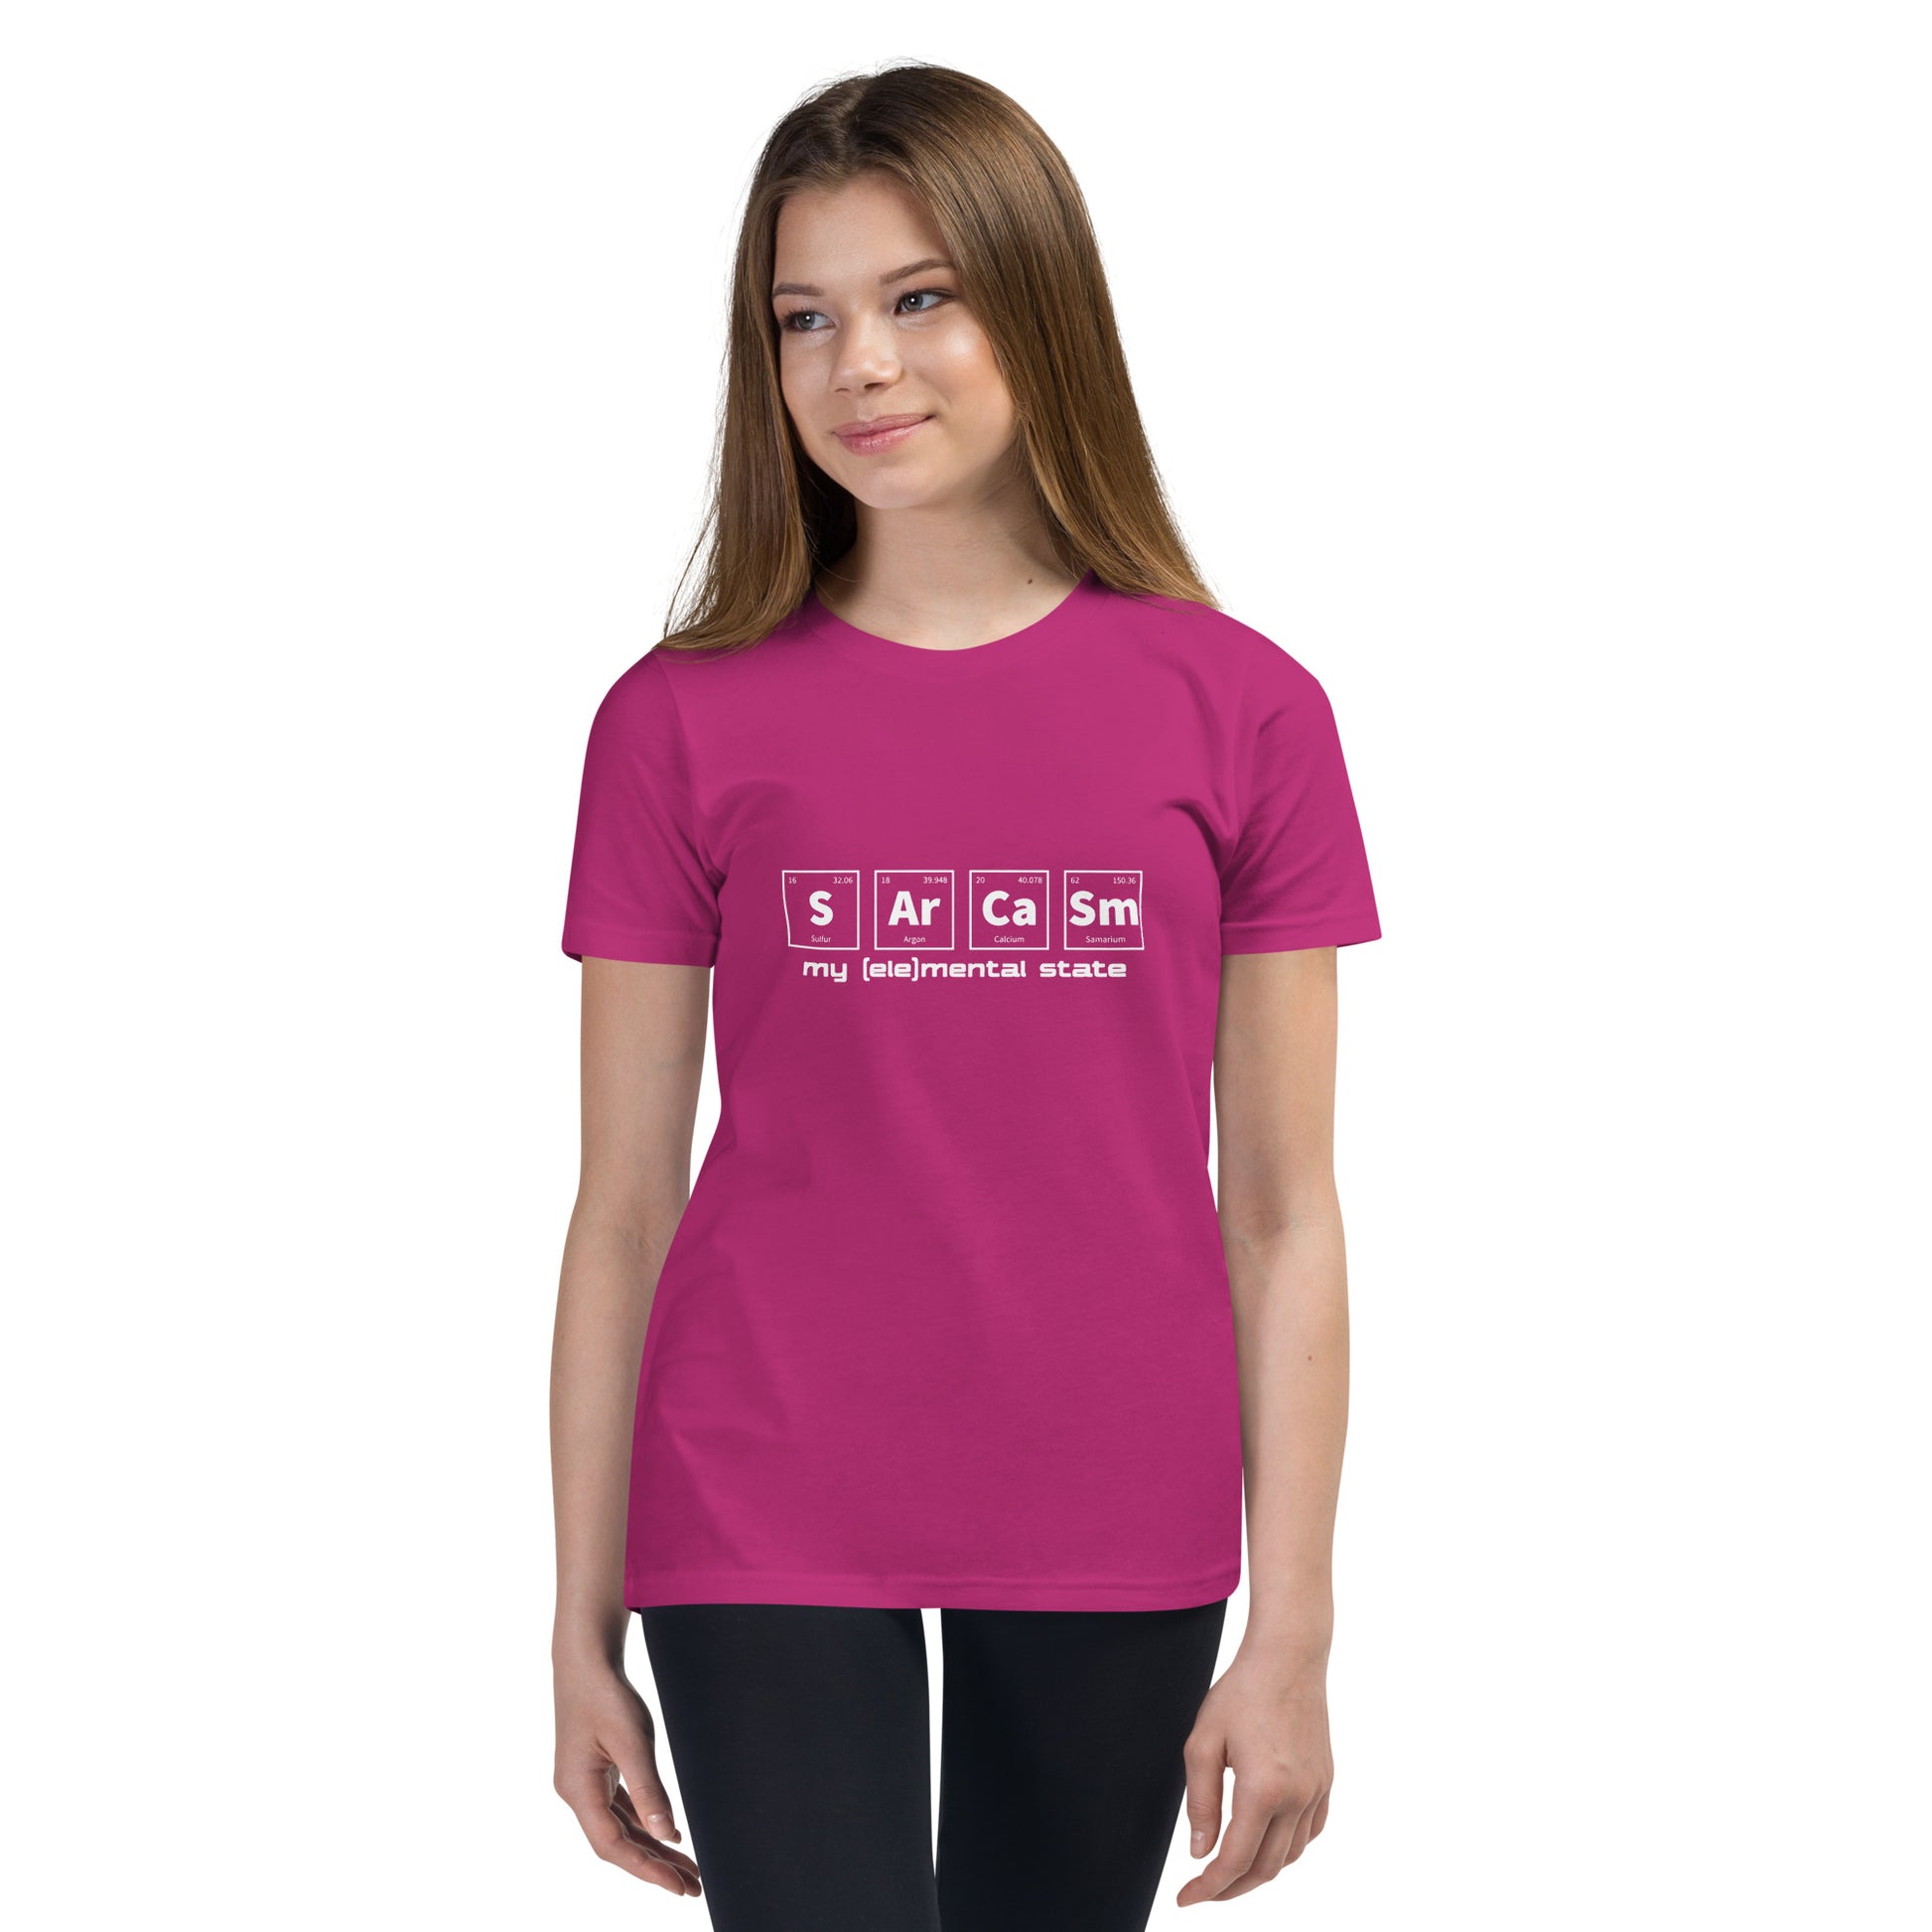 Model wearing Berry (hot pink) youth t-shirt with graphic of periodic table of elements symbols for Sulfur (S), Argon (Ar), Calcium (Ca), and Samarium (Sm) and text "my (ele)mental state"